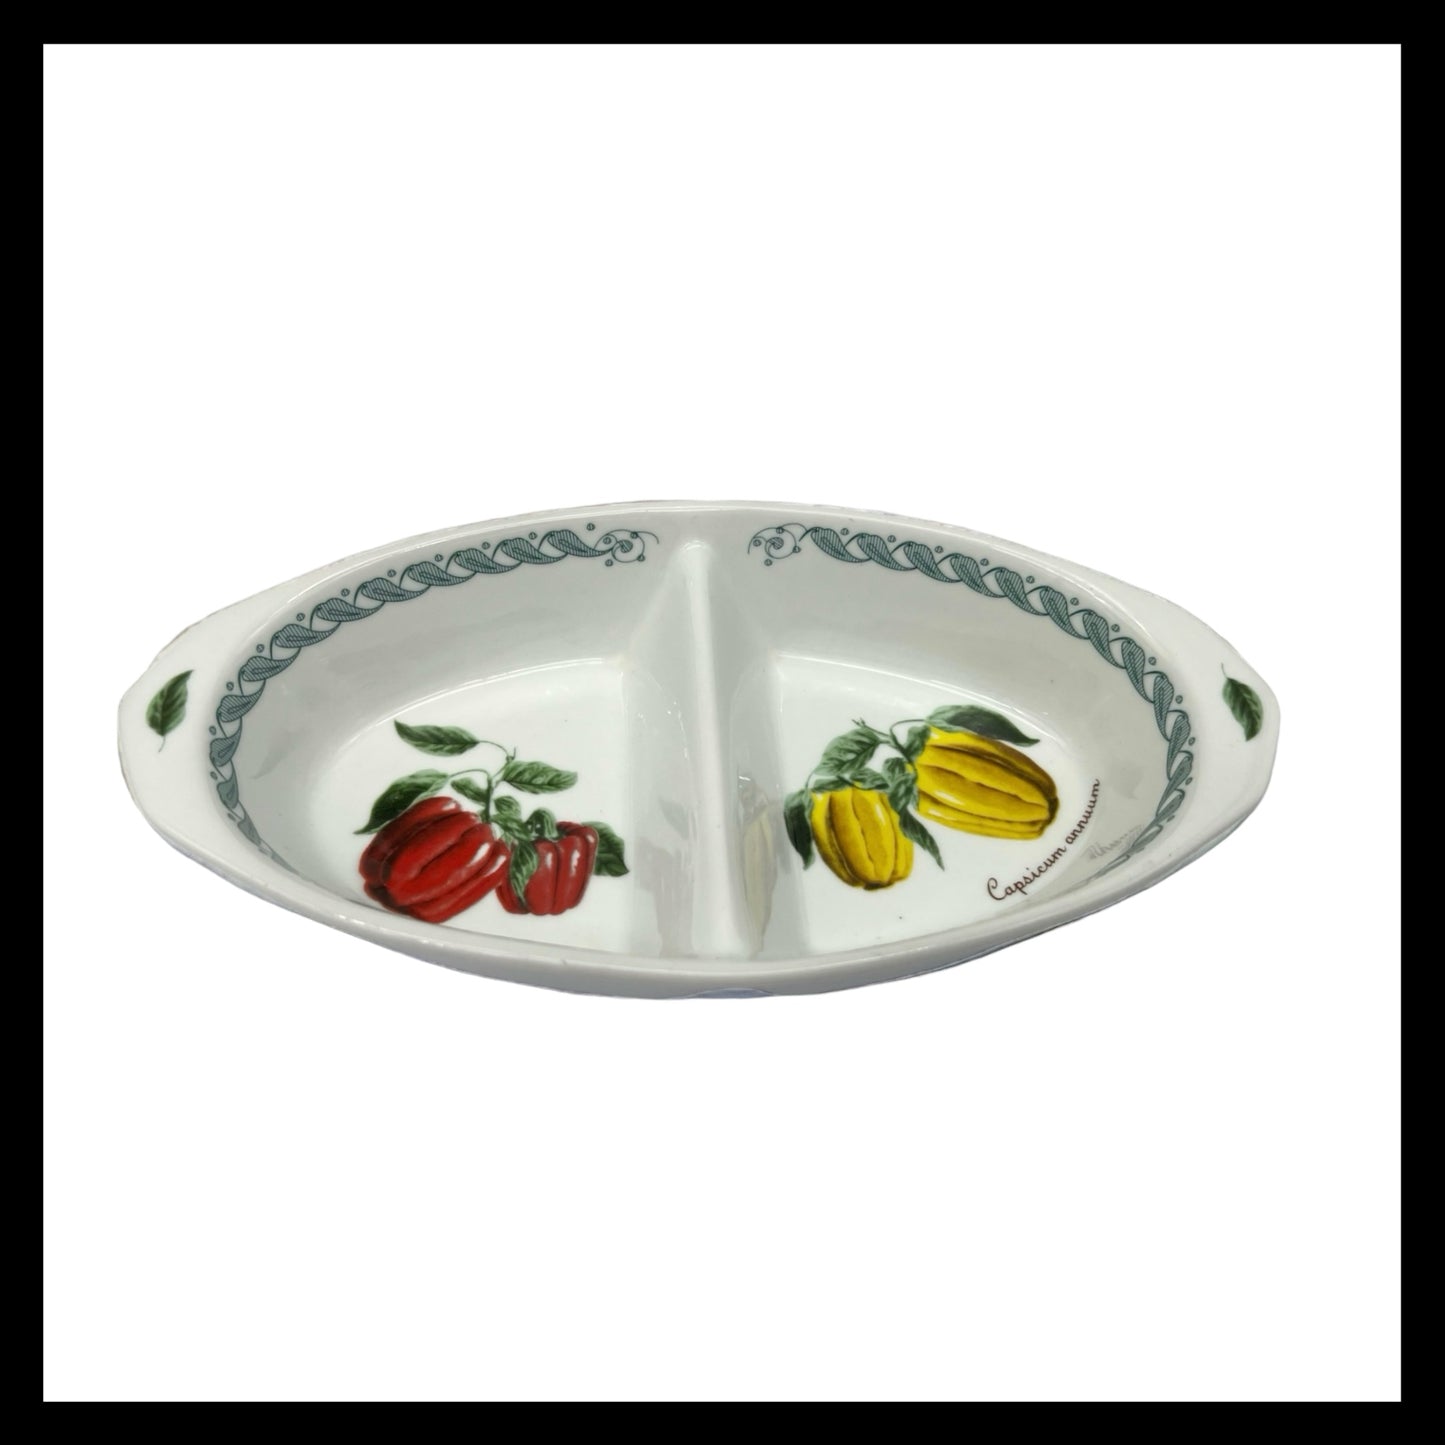 image Italian appetiser dish or tapas dish with a pepper decoration sold by All Things French Store